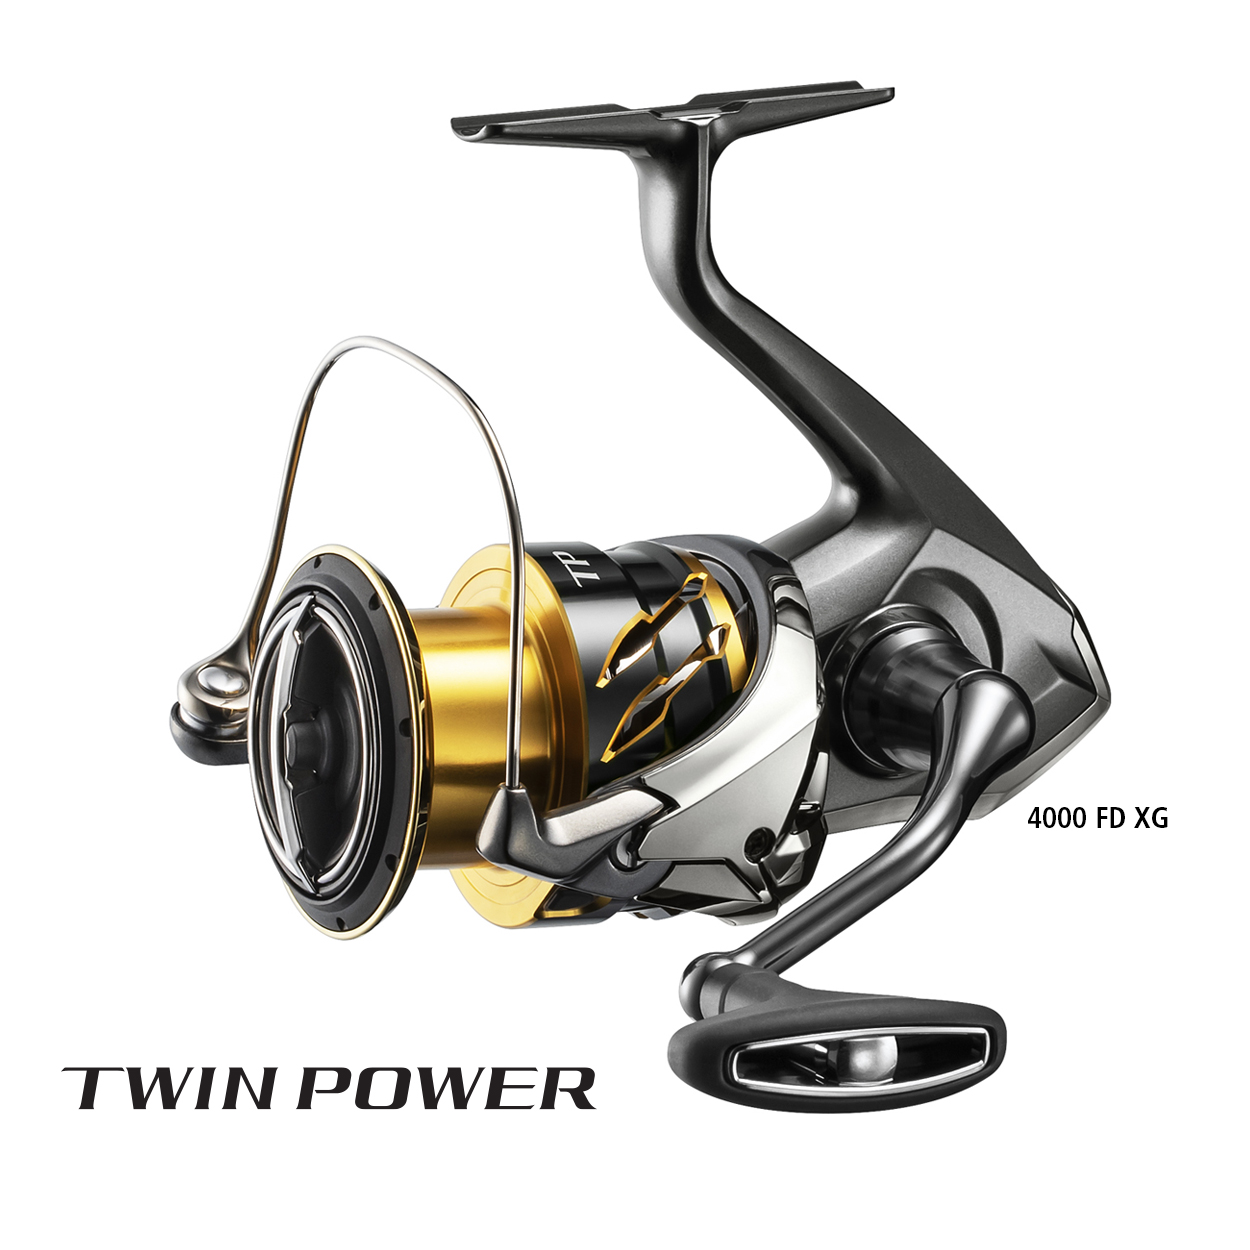 Shimano Twin Power FD Spin Reels with Free Shipping & Neoprene Reel Bag